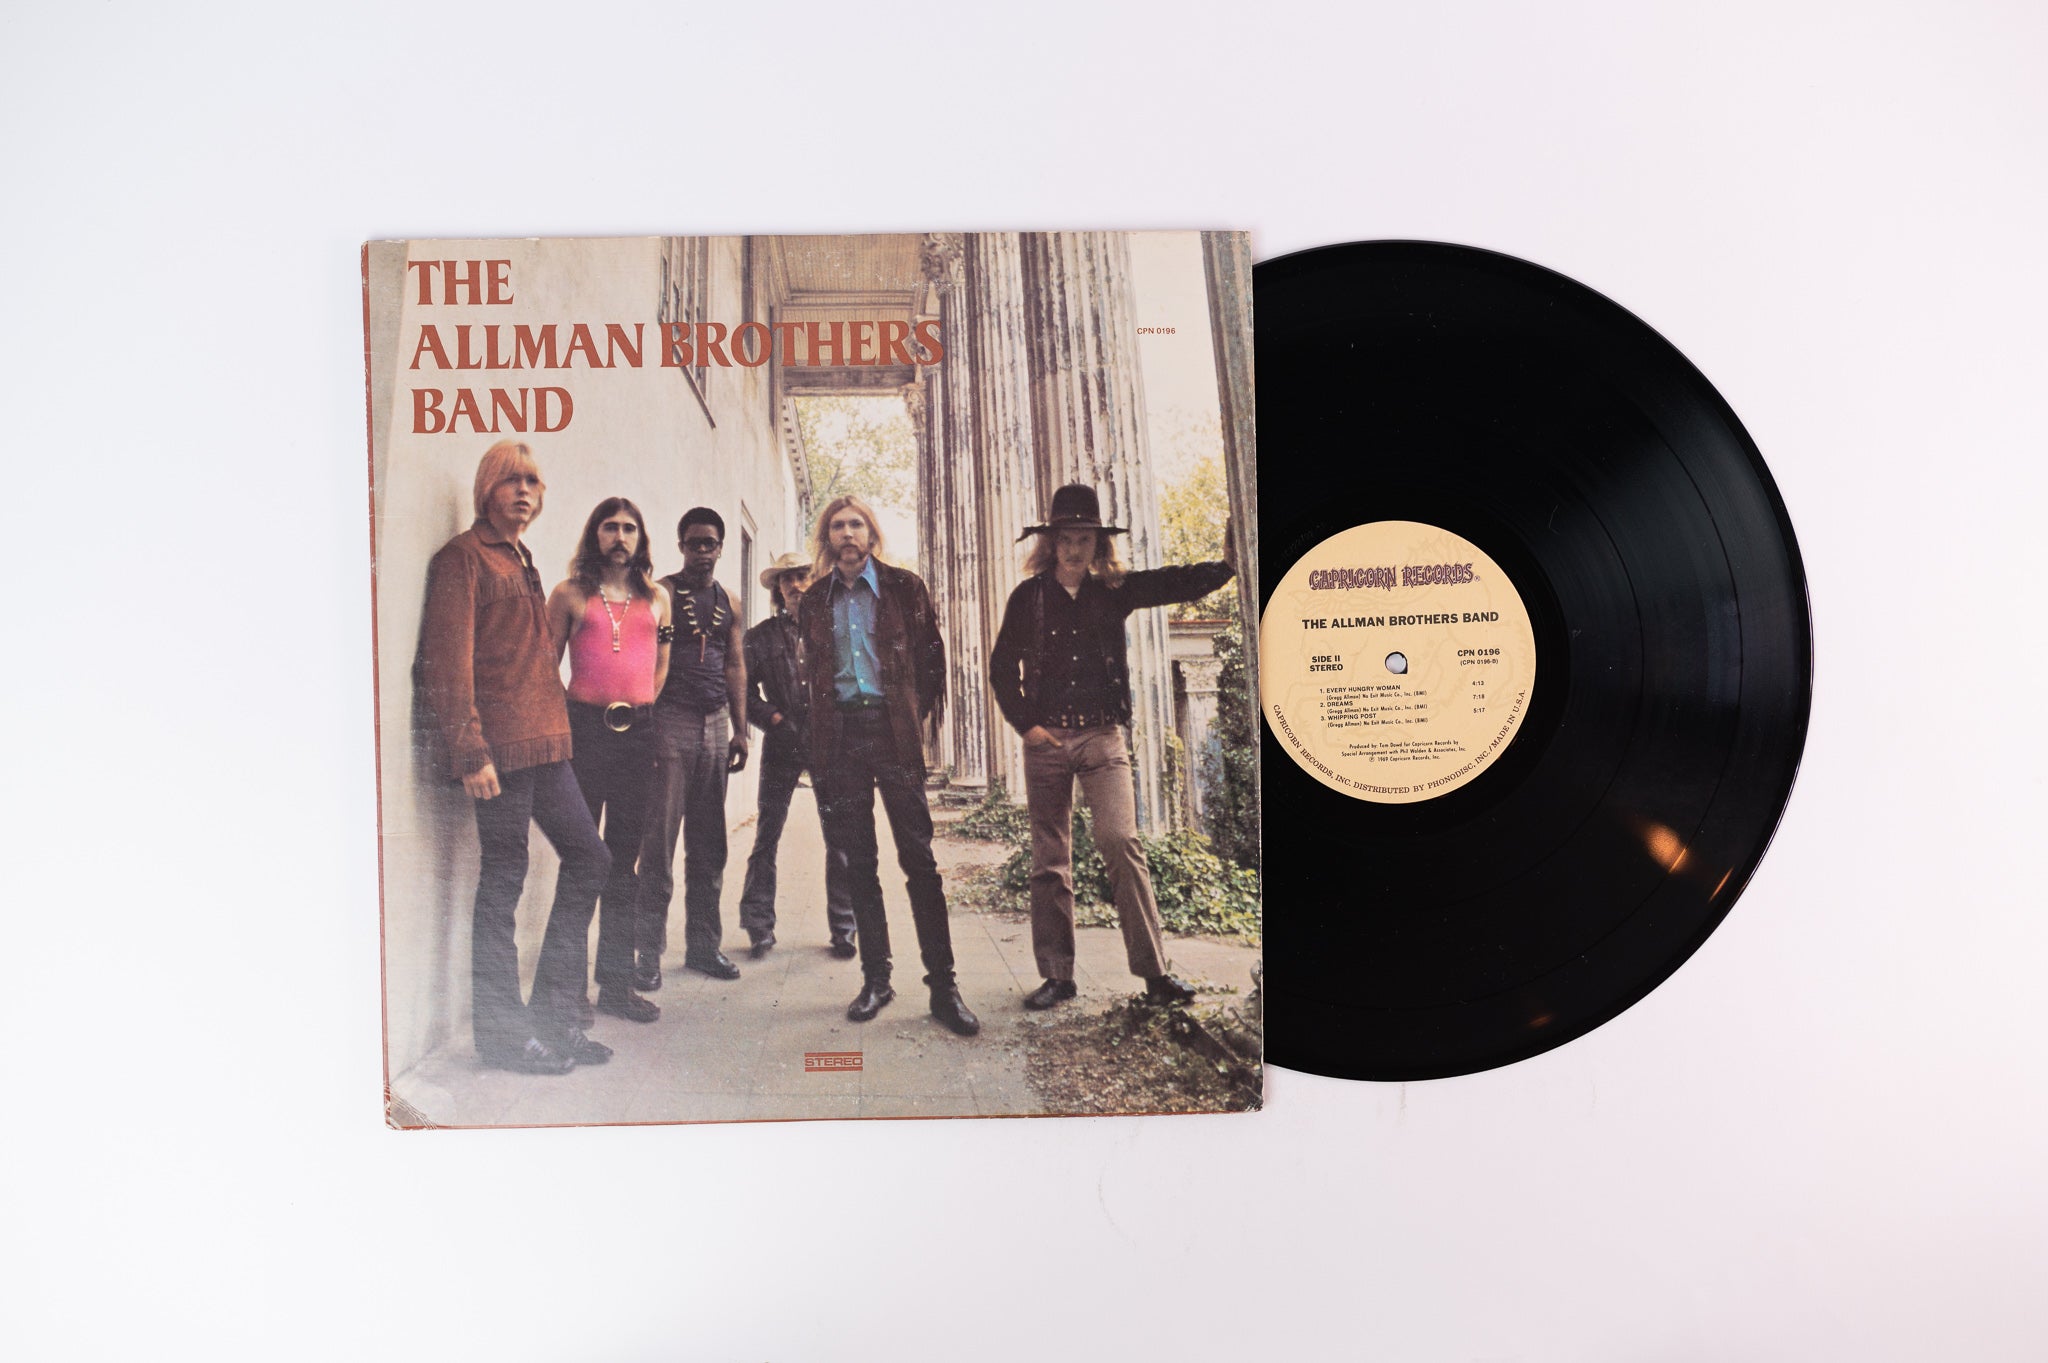 The Allman Brothers Band - The Allman Brothers Band on Polydor Record Club Reissue